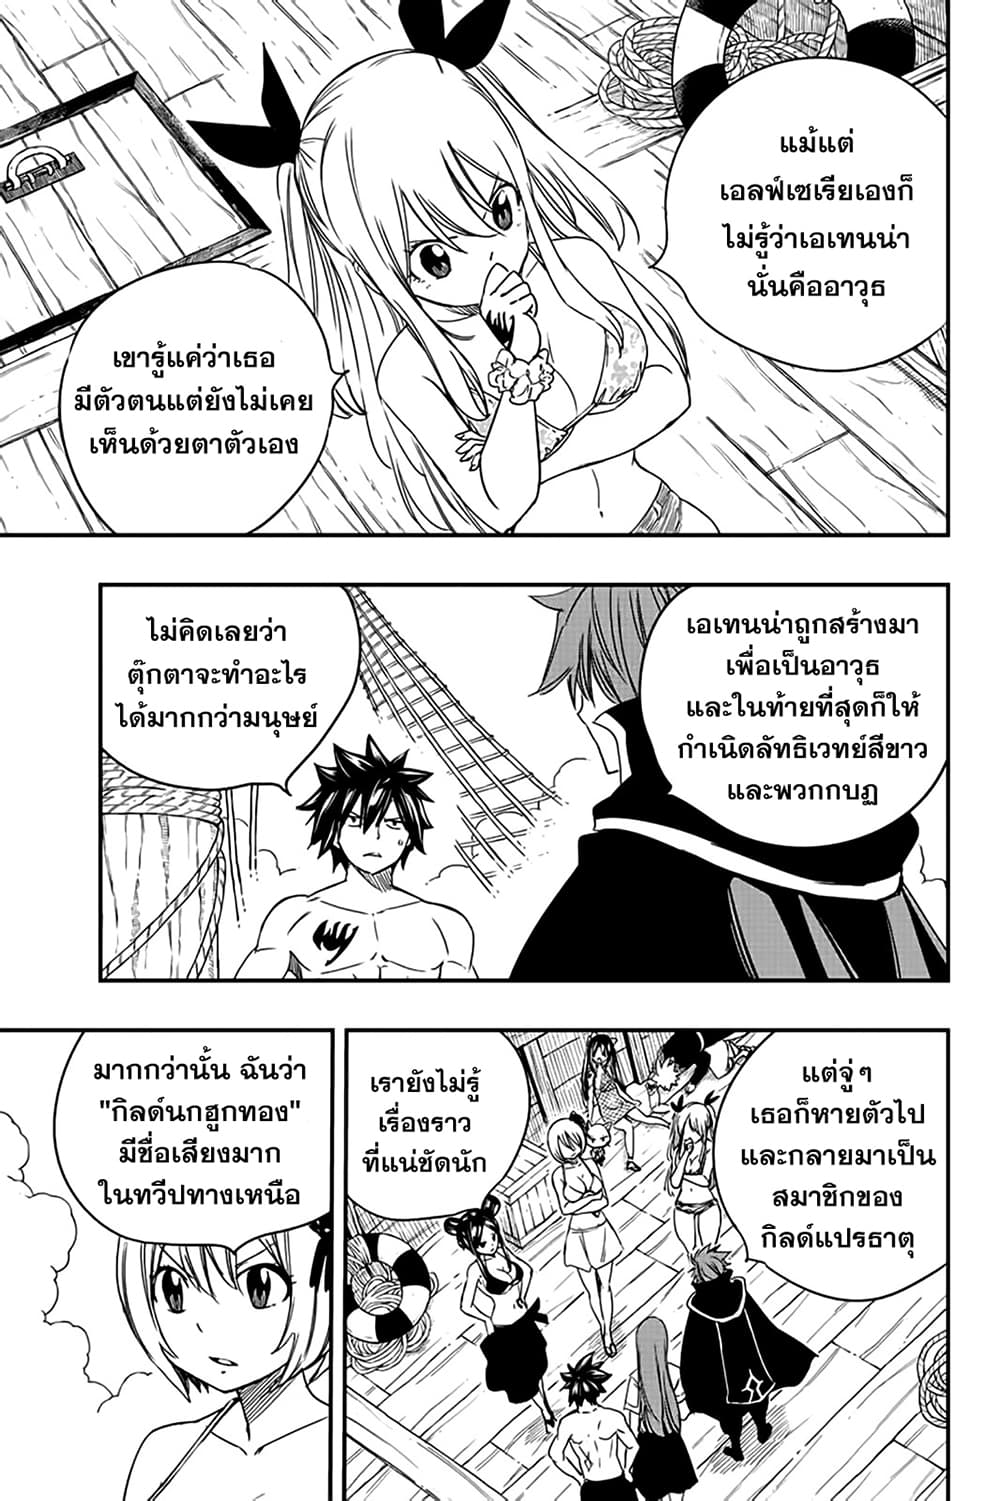 Fairy Tail 100 Years Quest à¸à¸­à¸à¸à¸µà¹ 126 (5)